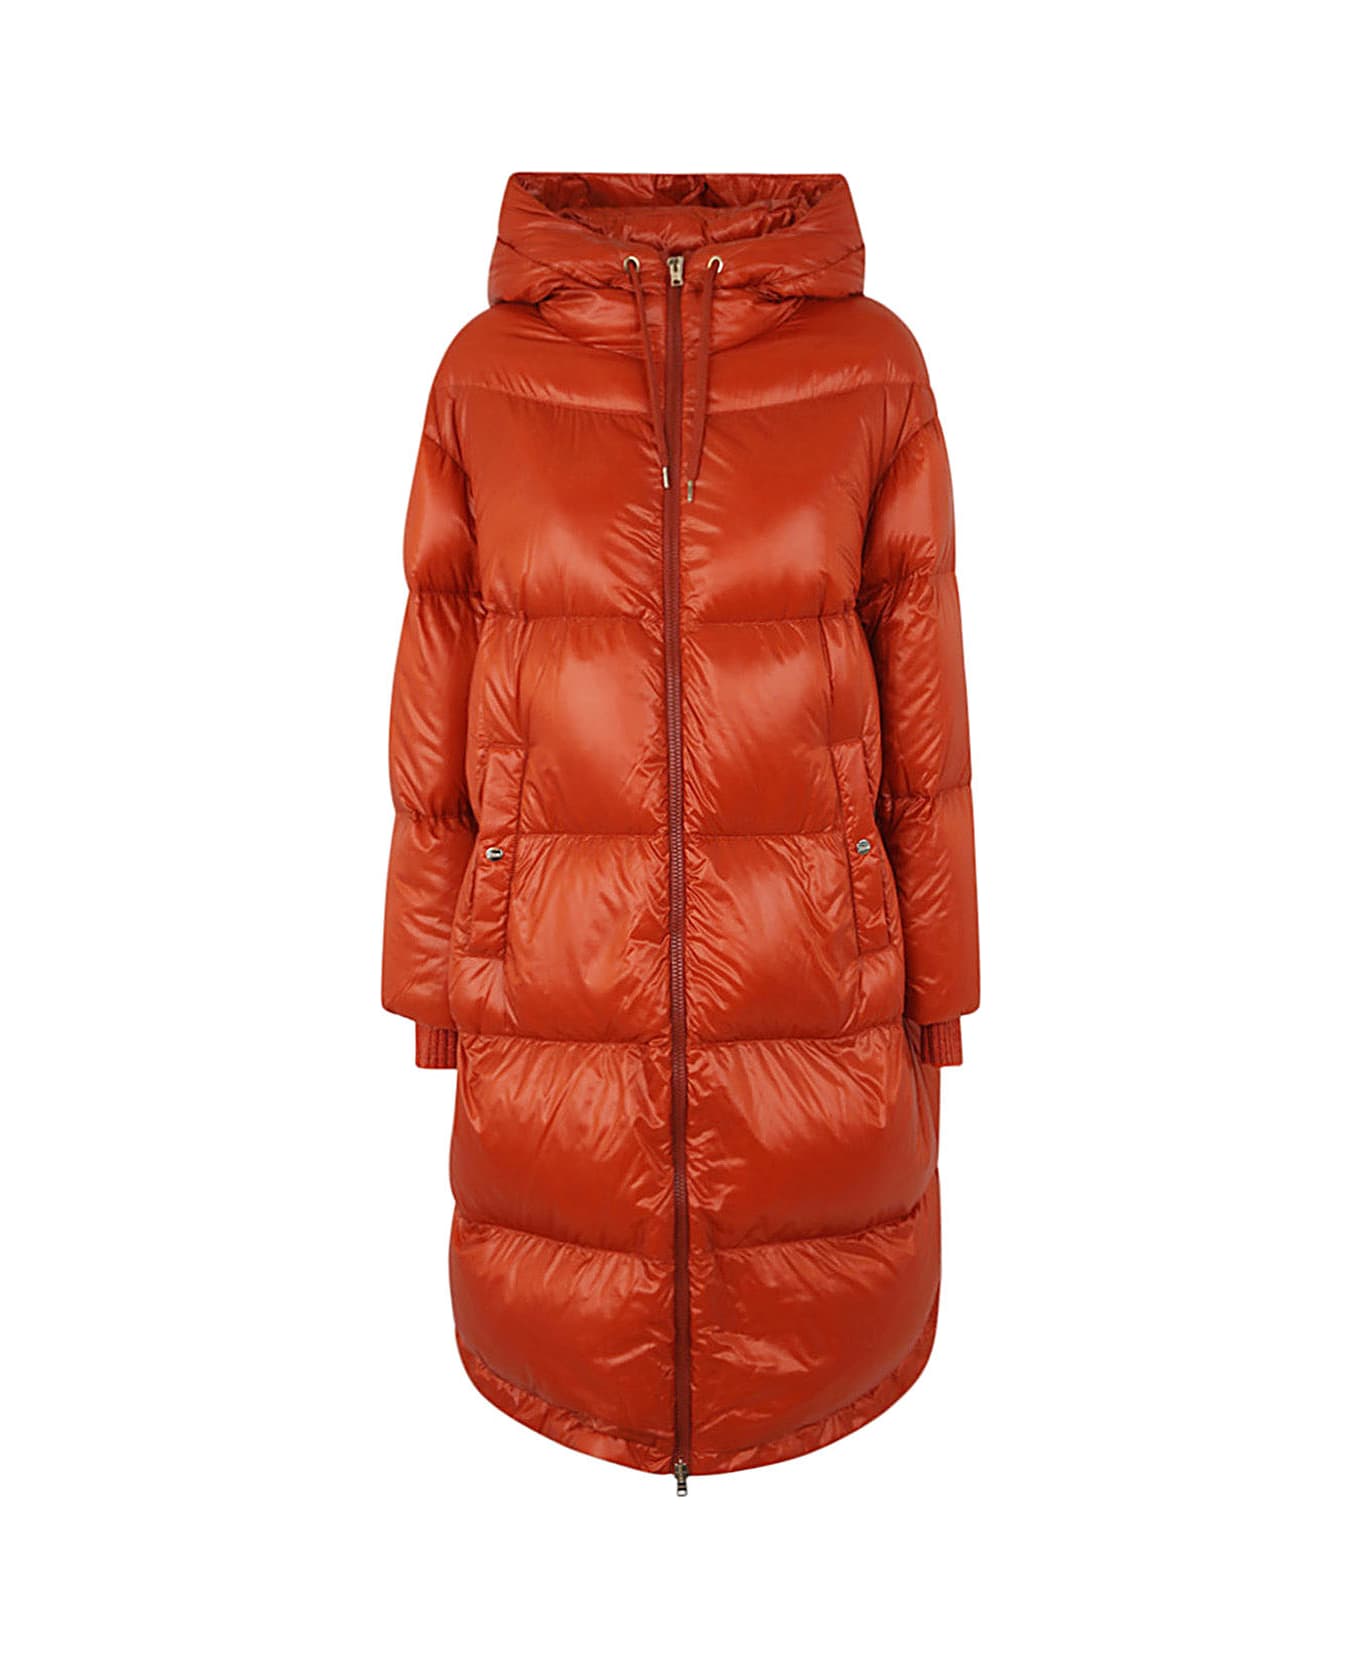 Herno Quilted Hooded Drawstring Down Coat - Arancio